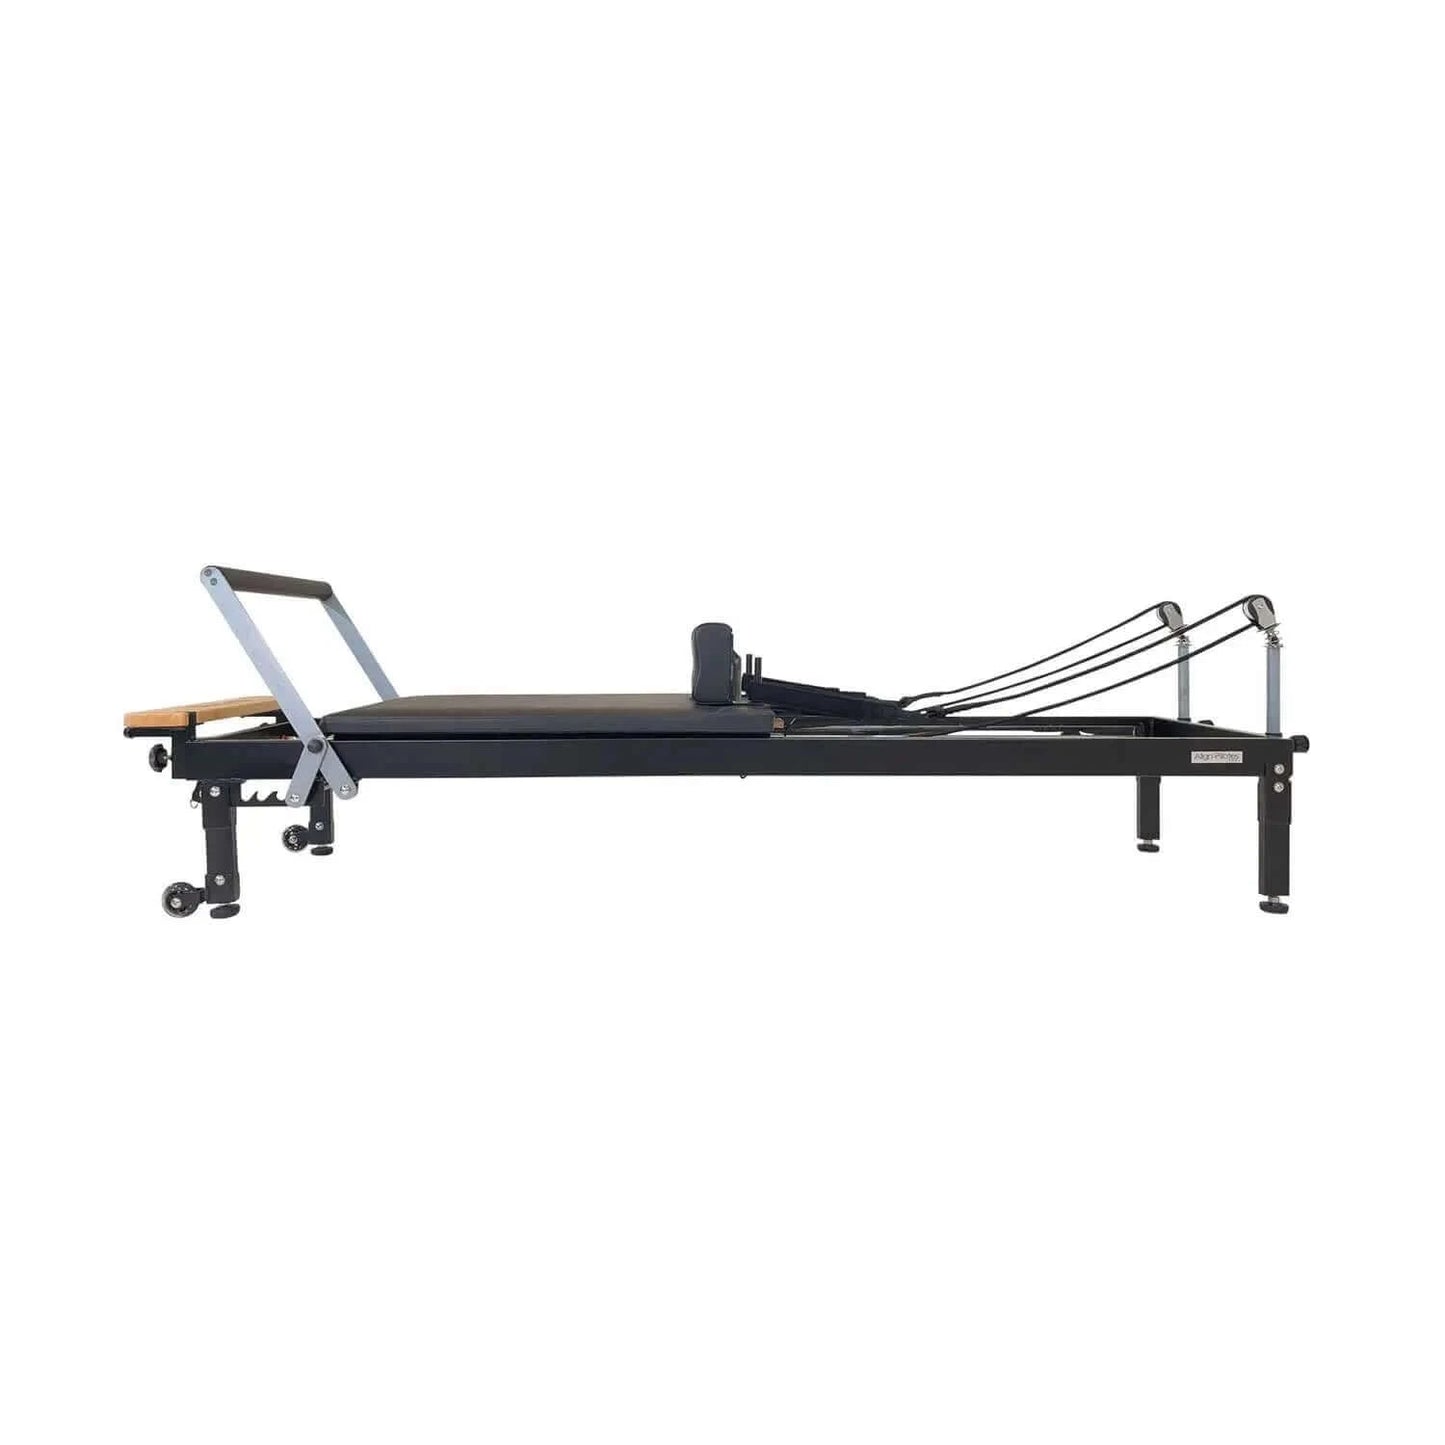  Align Pilates Leg Extensions for H Series by Align Pilates sold by Pilates Matters® by BSP LLC